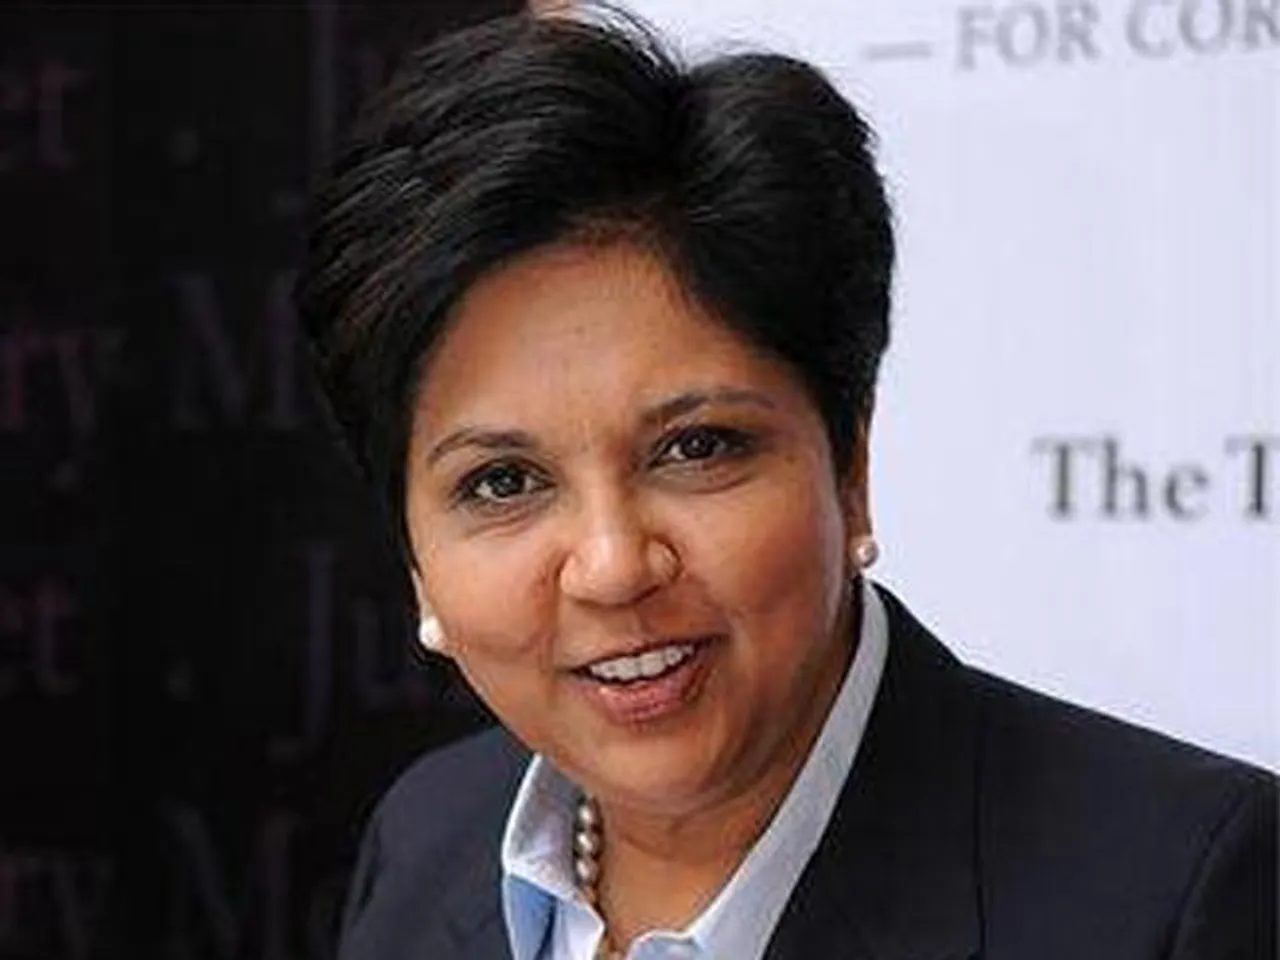 Be As Good As You Can. Five Powerful Indra Nooyi Quotes To Inspire The Leader in Us